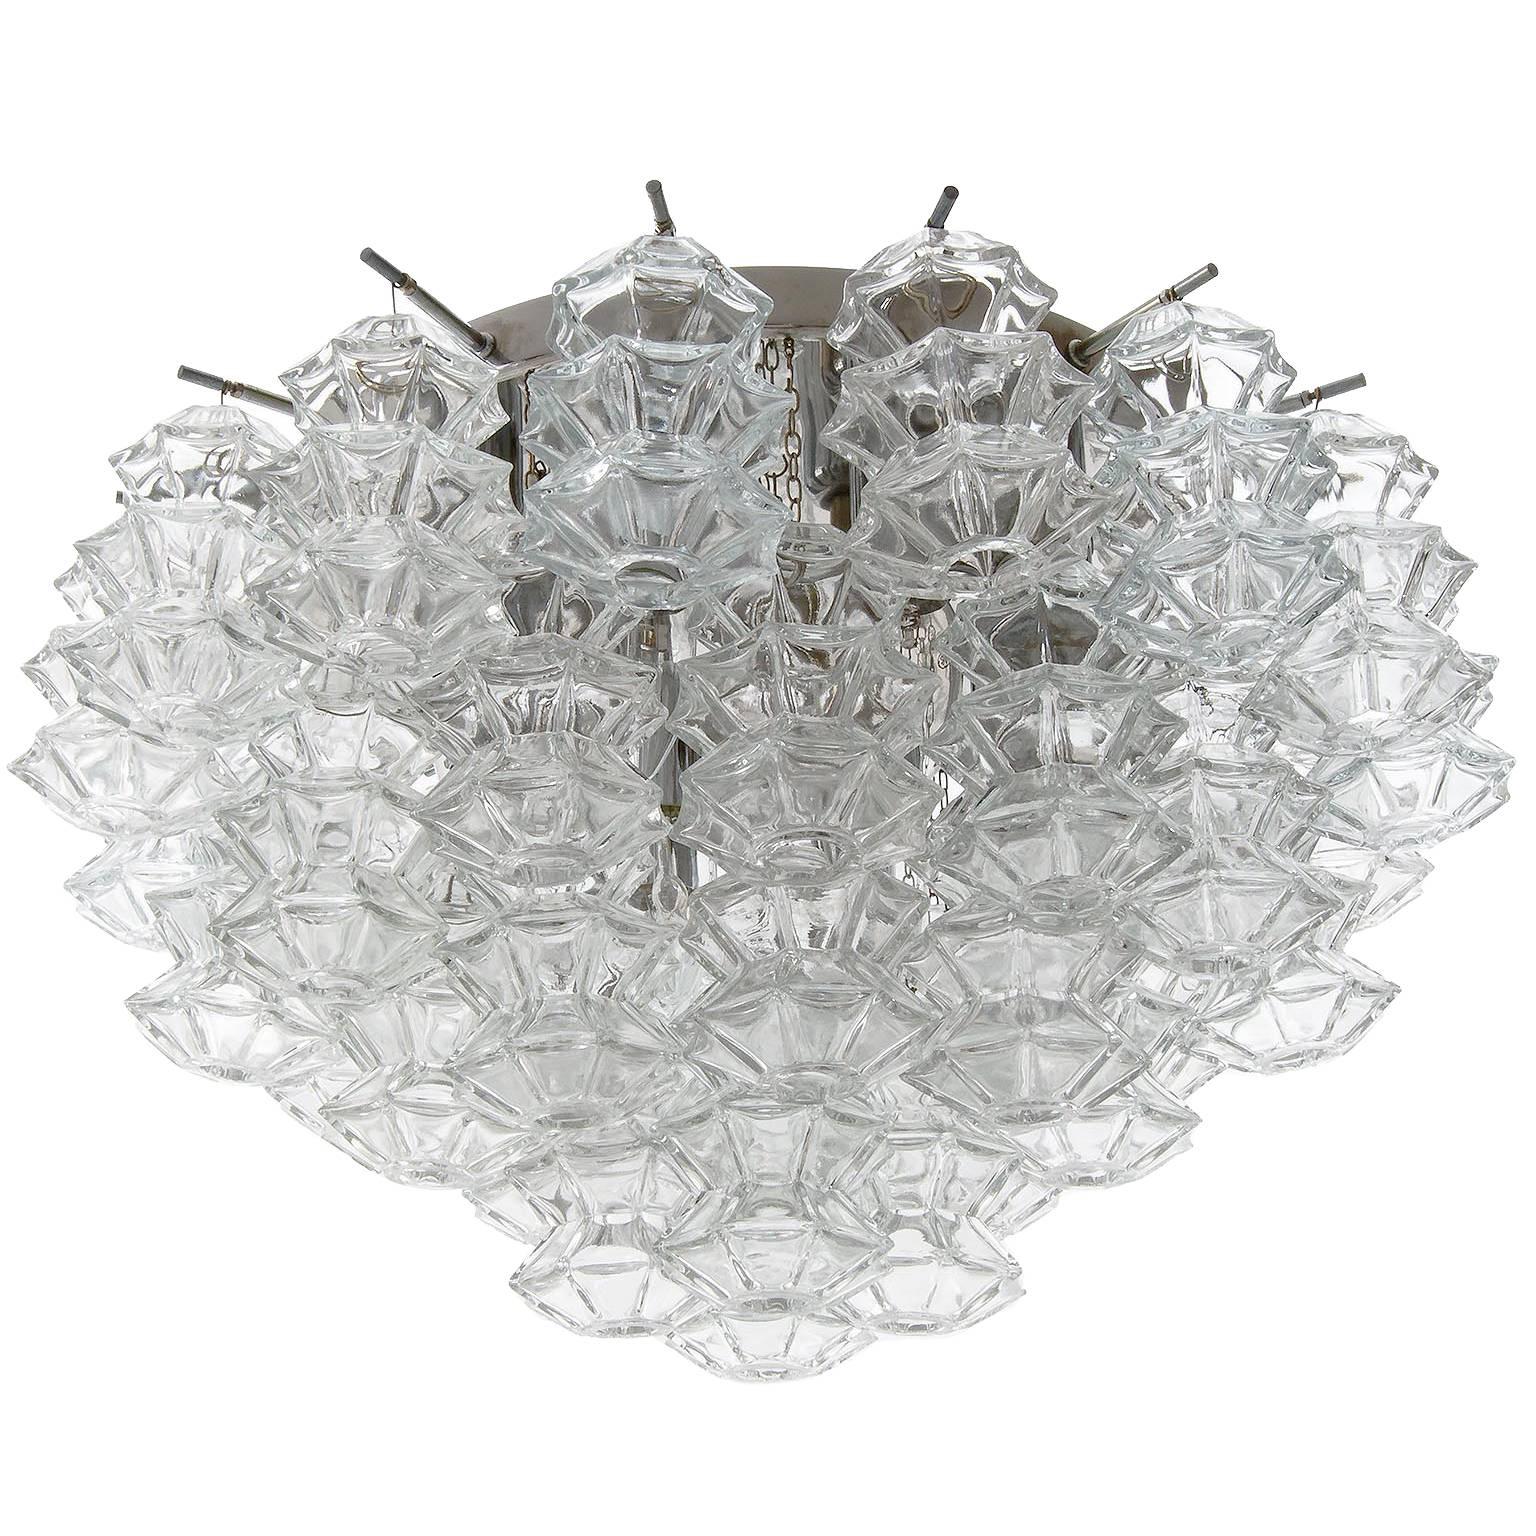 One of four large flush mount chandeliers 